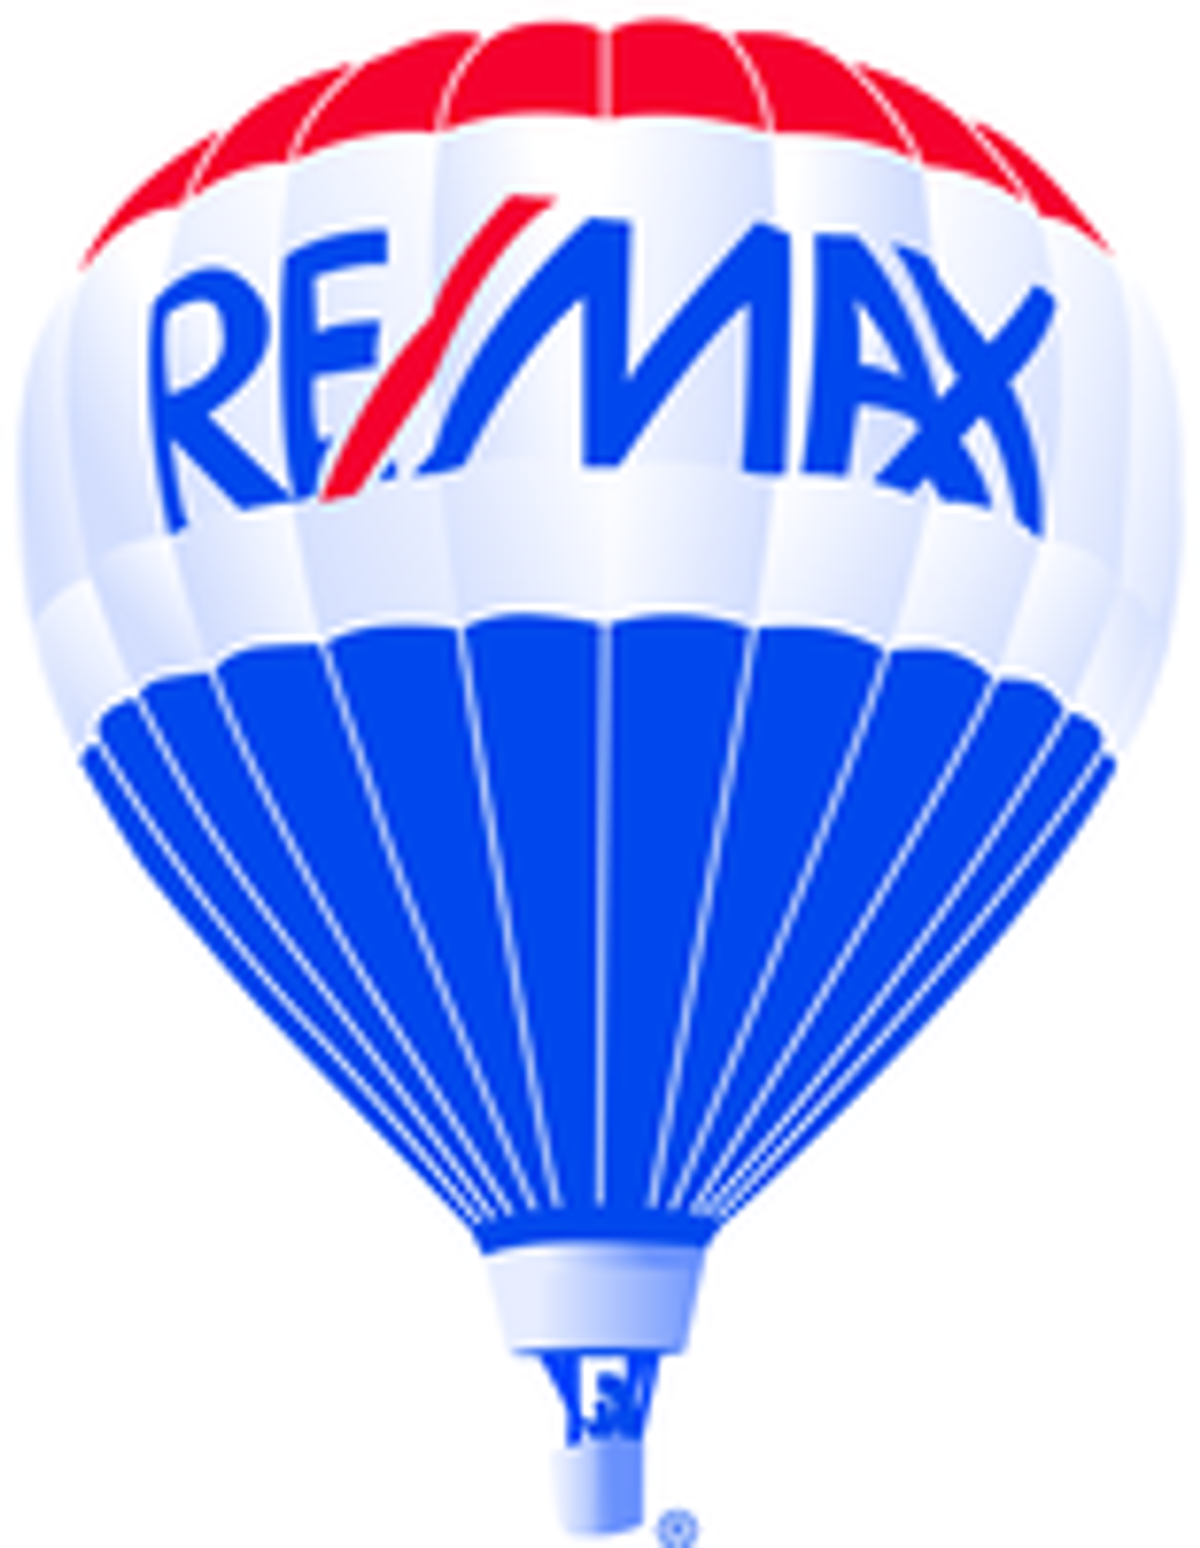 Photo for Paige Guy, Listing Agent at RE/MAX Tyler